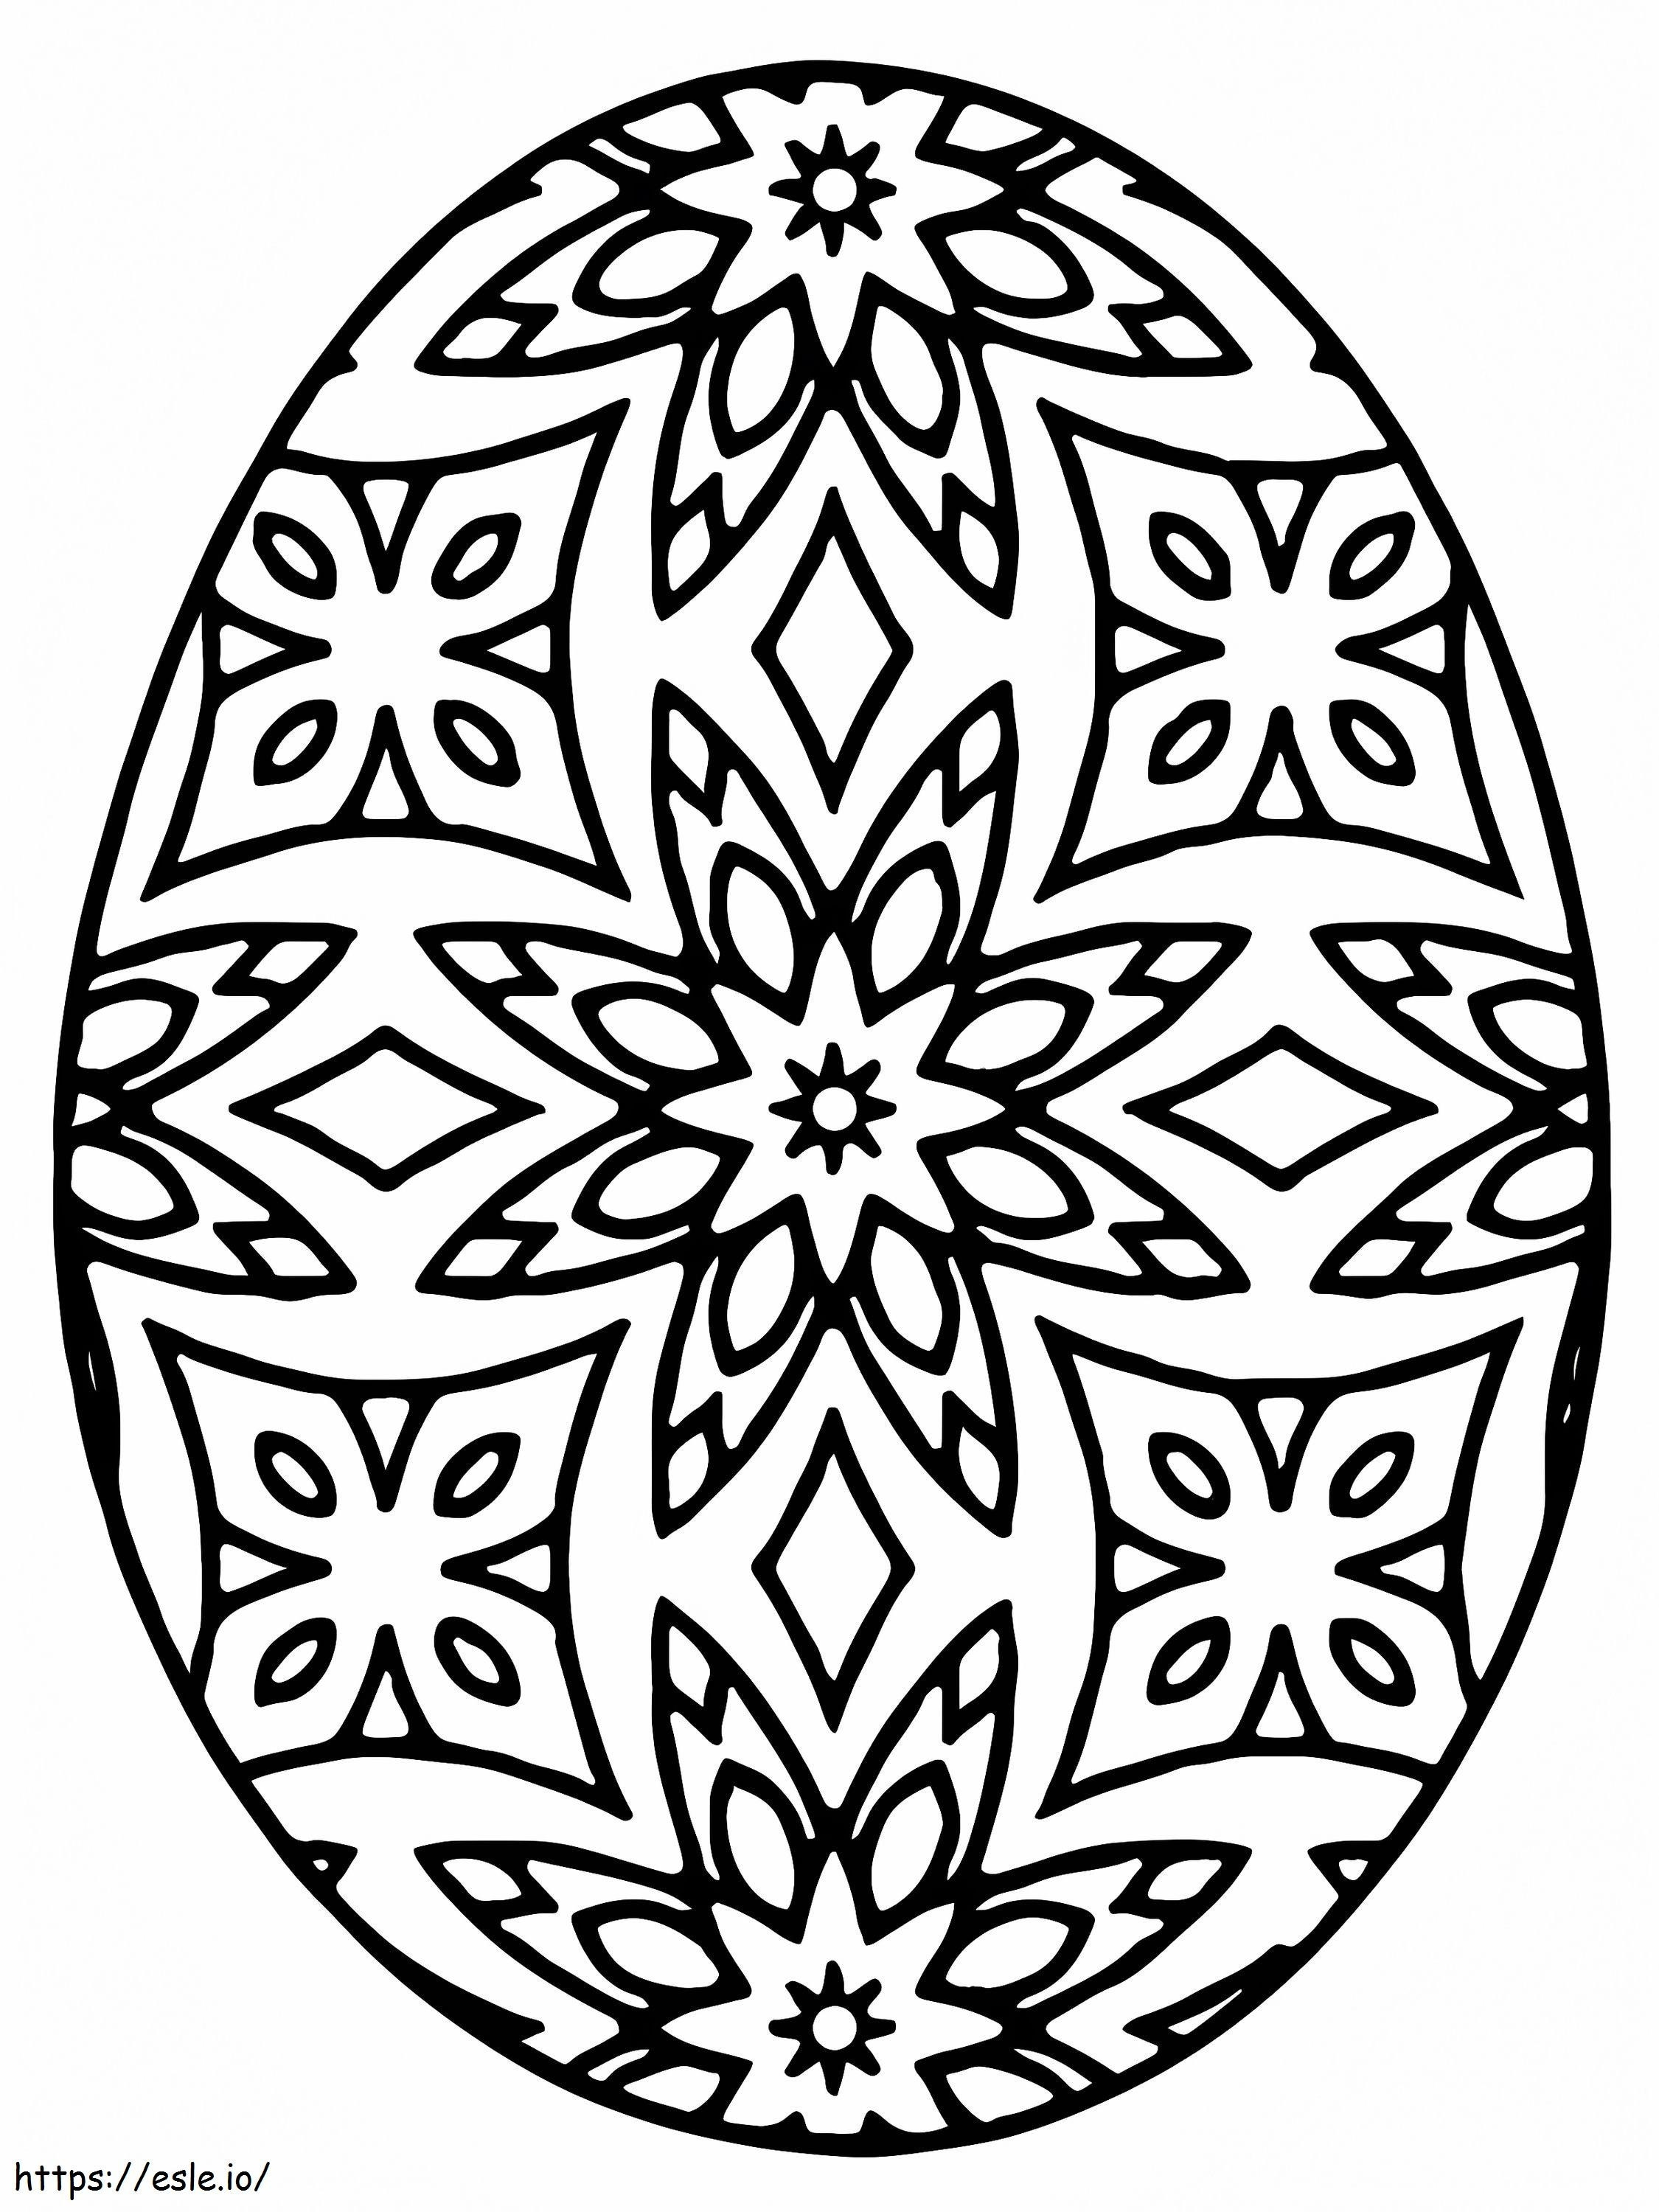 Refined Easter Egg coloring page